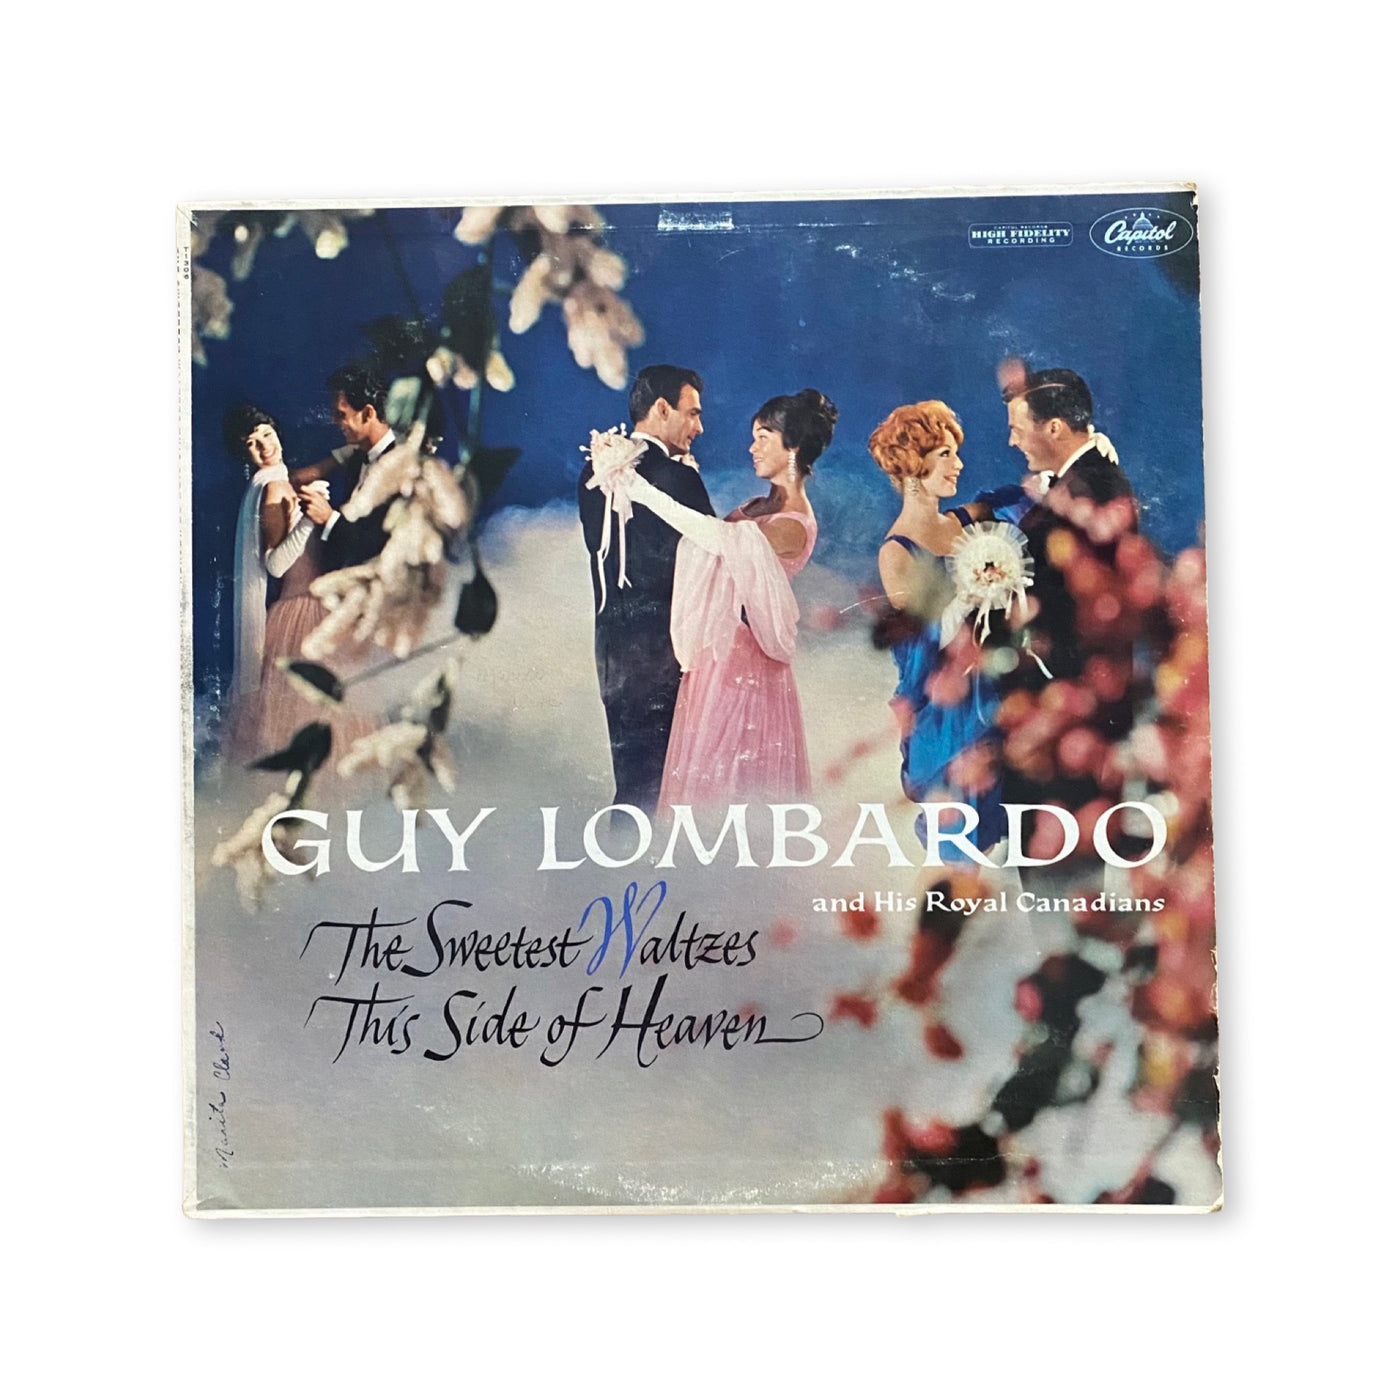 Guy Lombardo And His Royal Canadians - The Sweetest Waltzes This Side Of Heaven